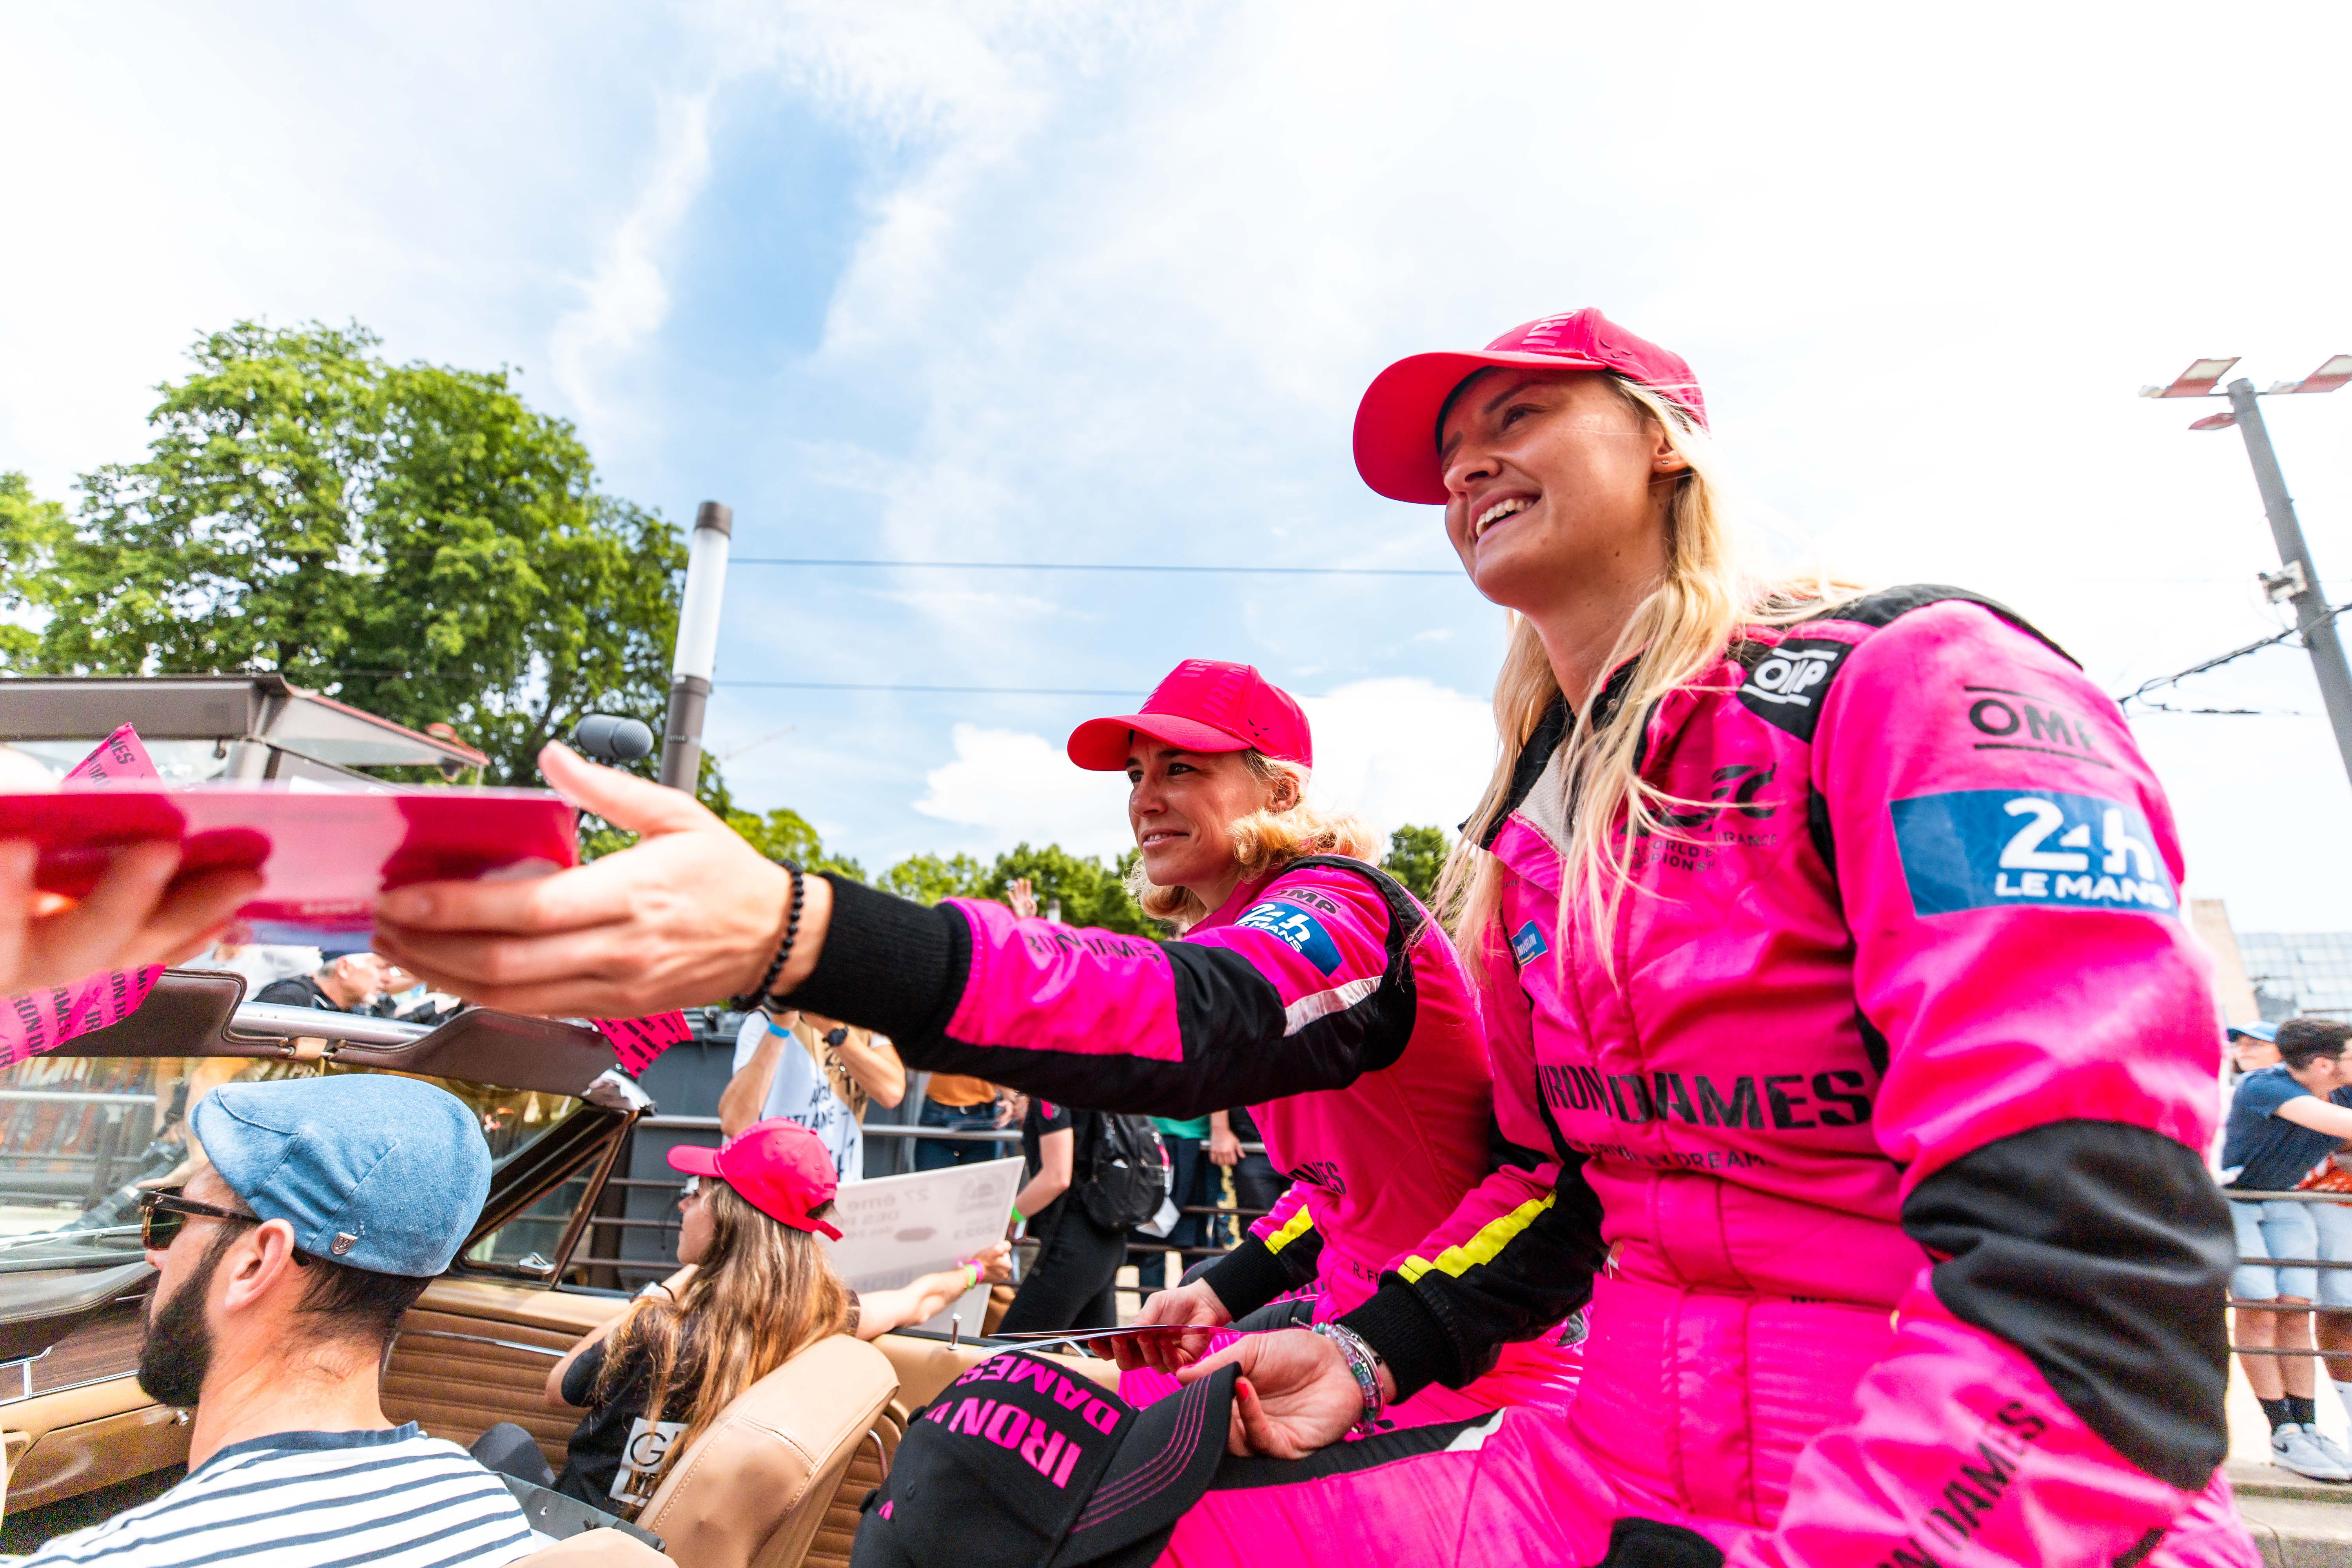 Iron Dames racing team signing autographs at Le Mans